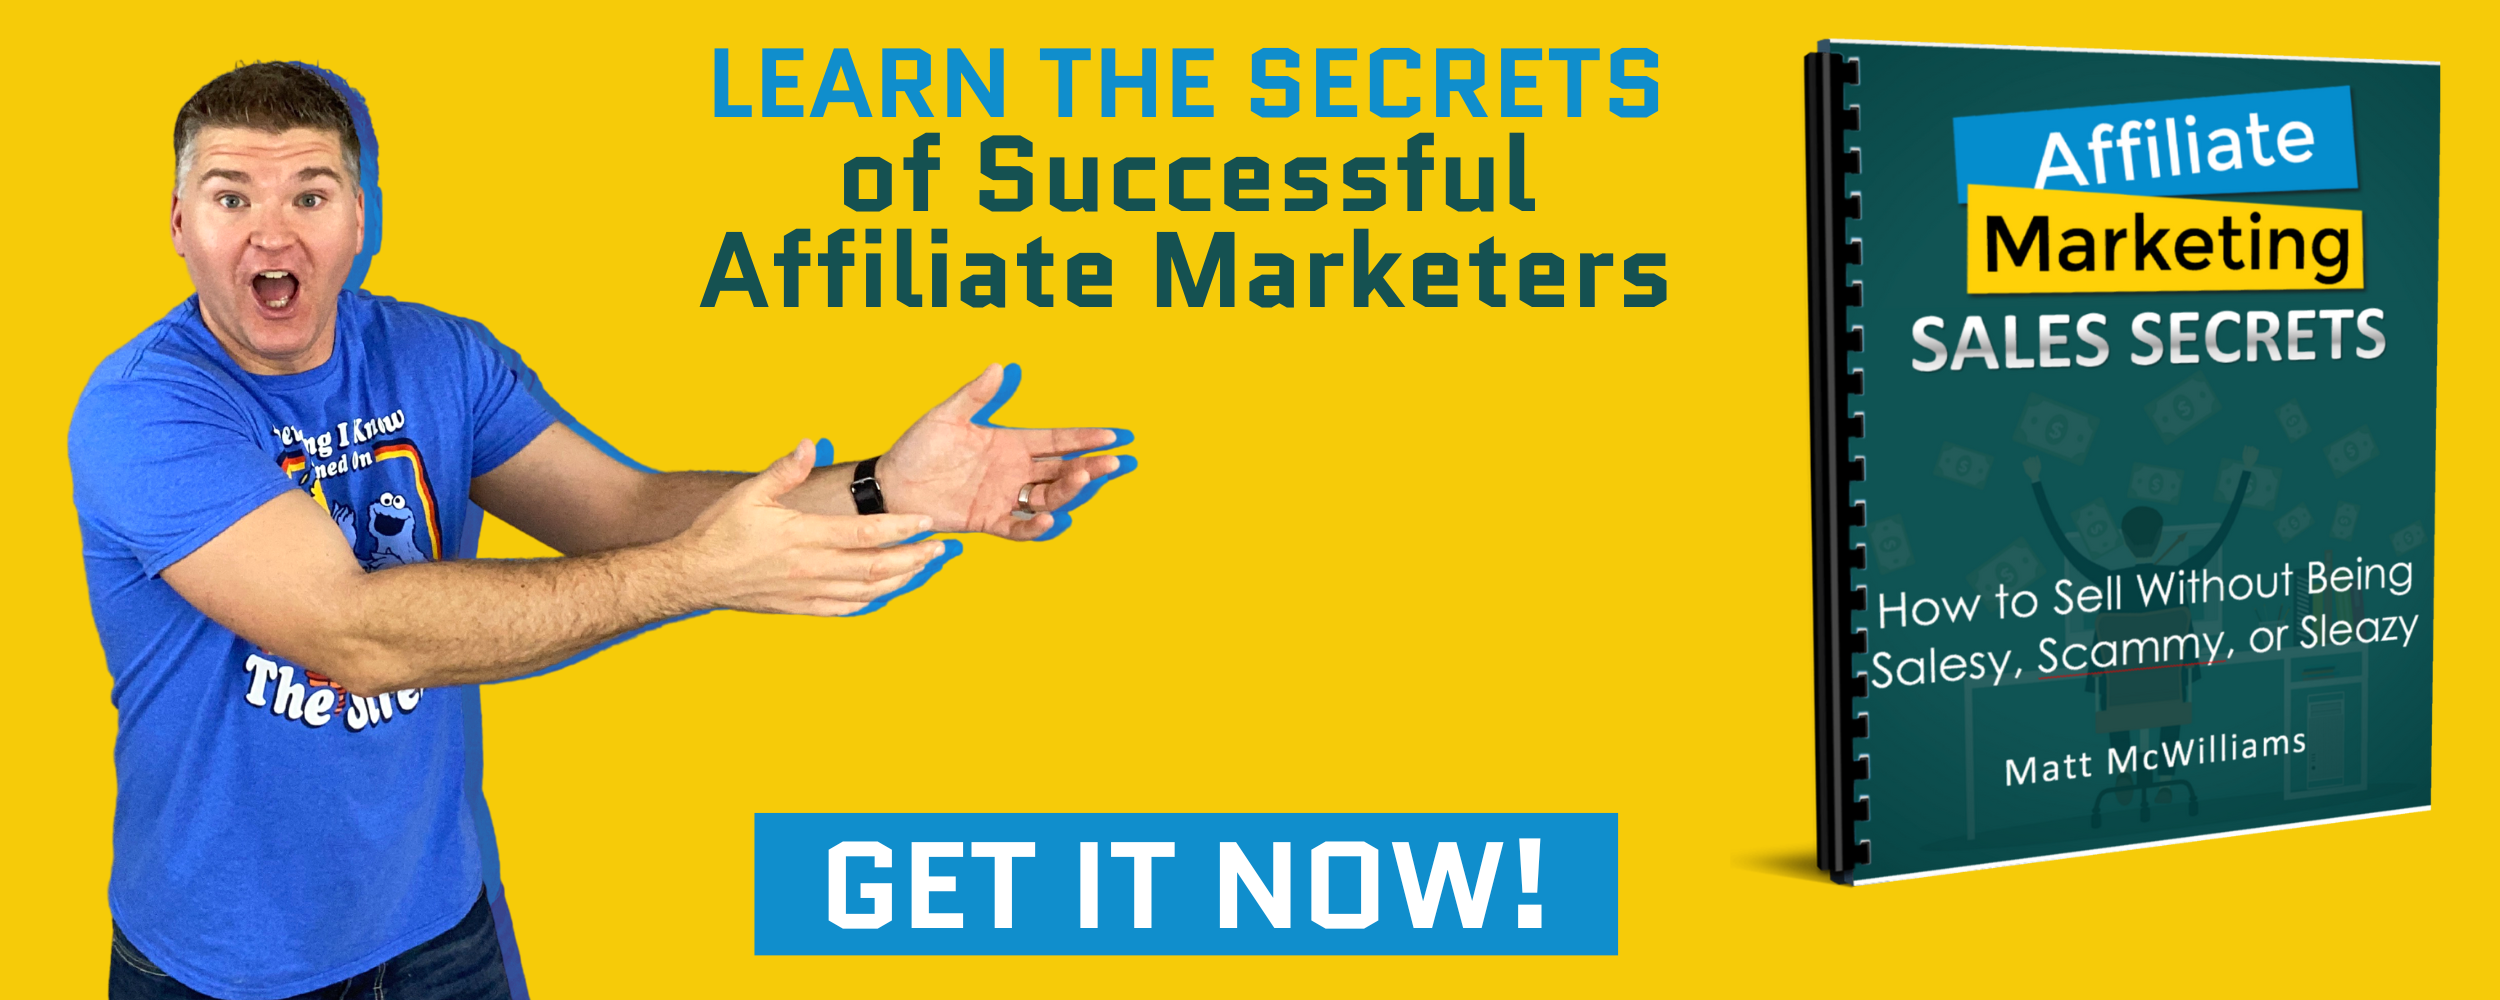 Learn the sales secrets of top affiliate marketers